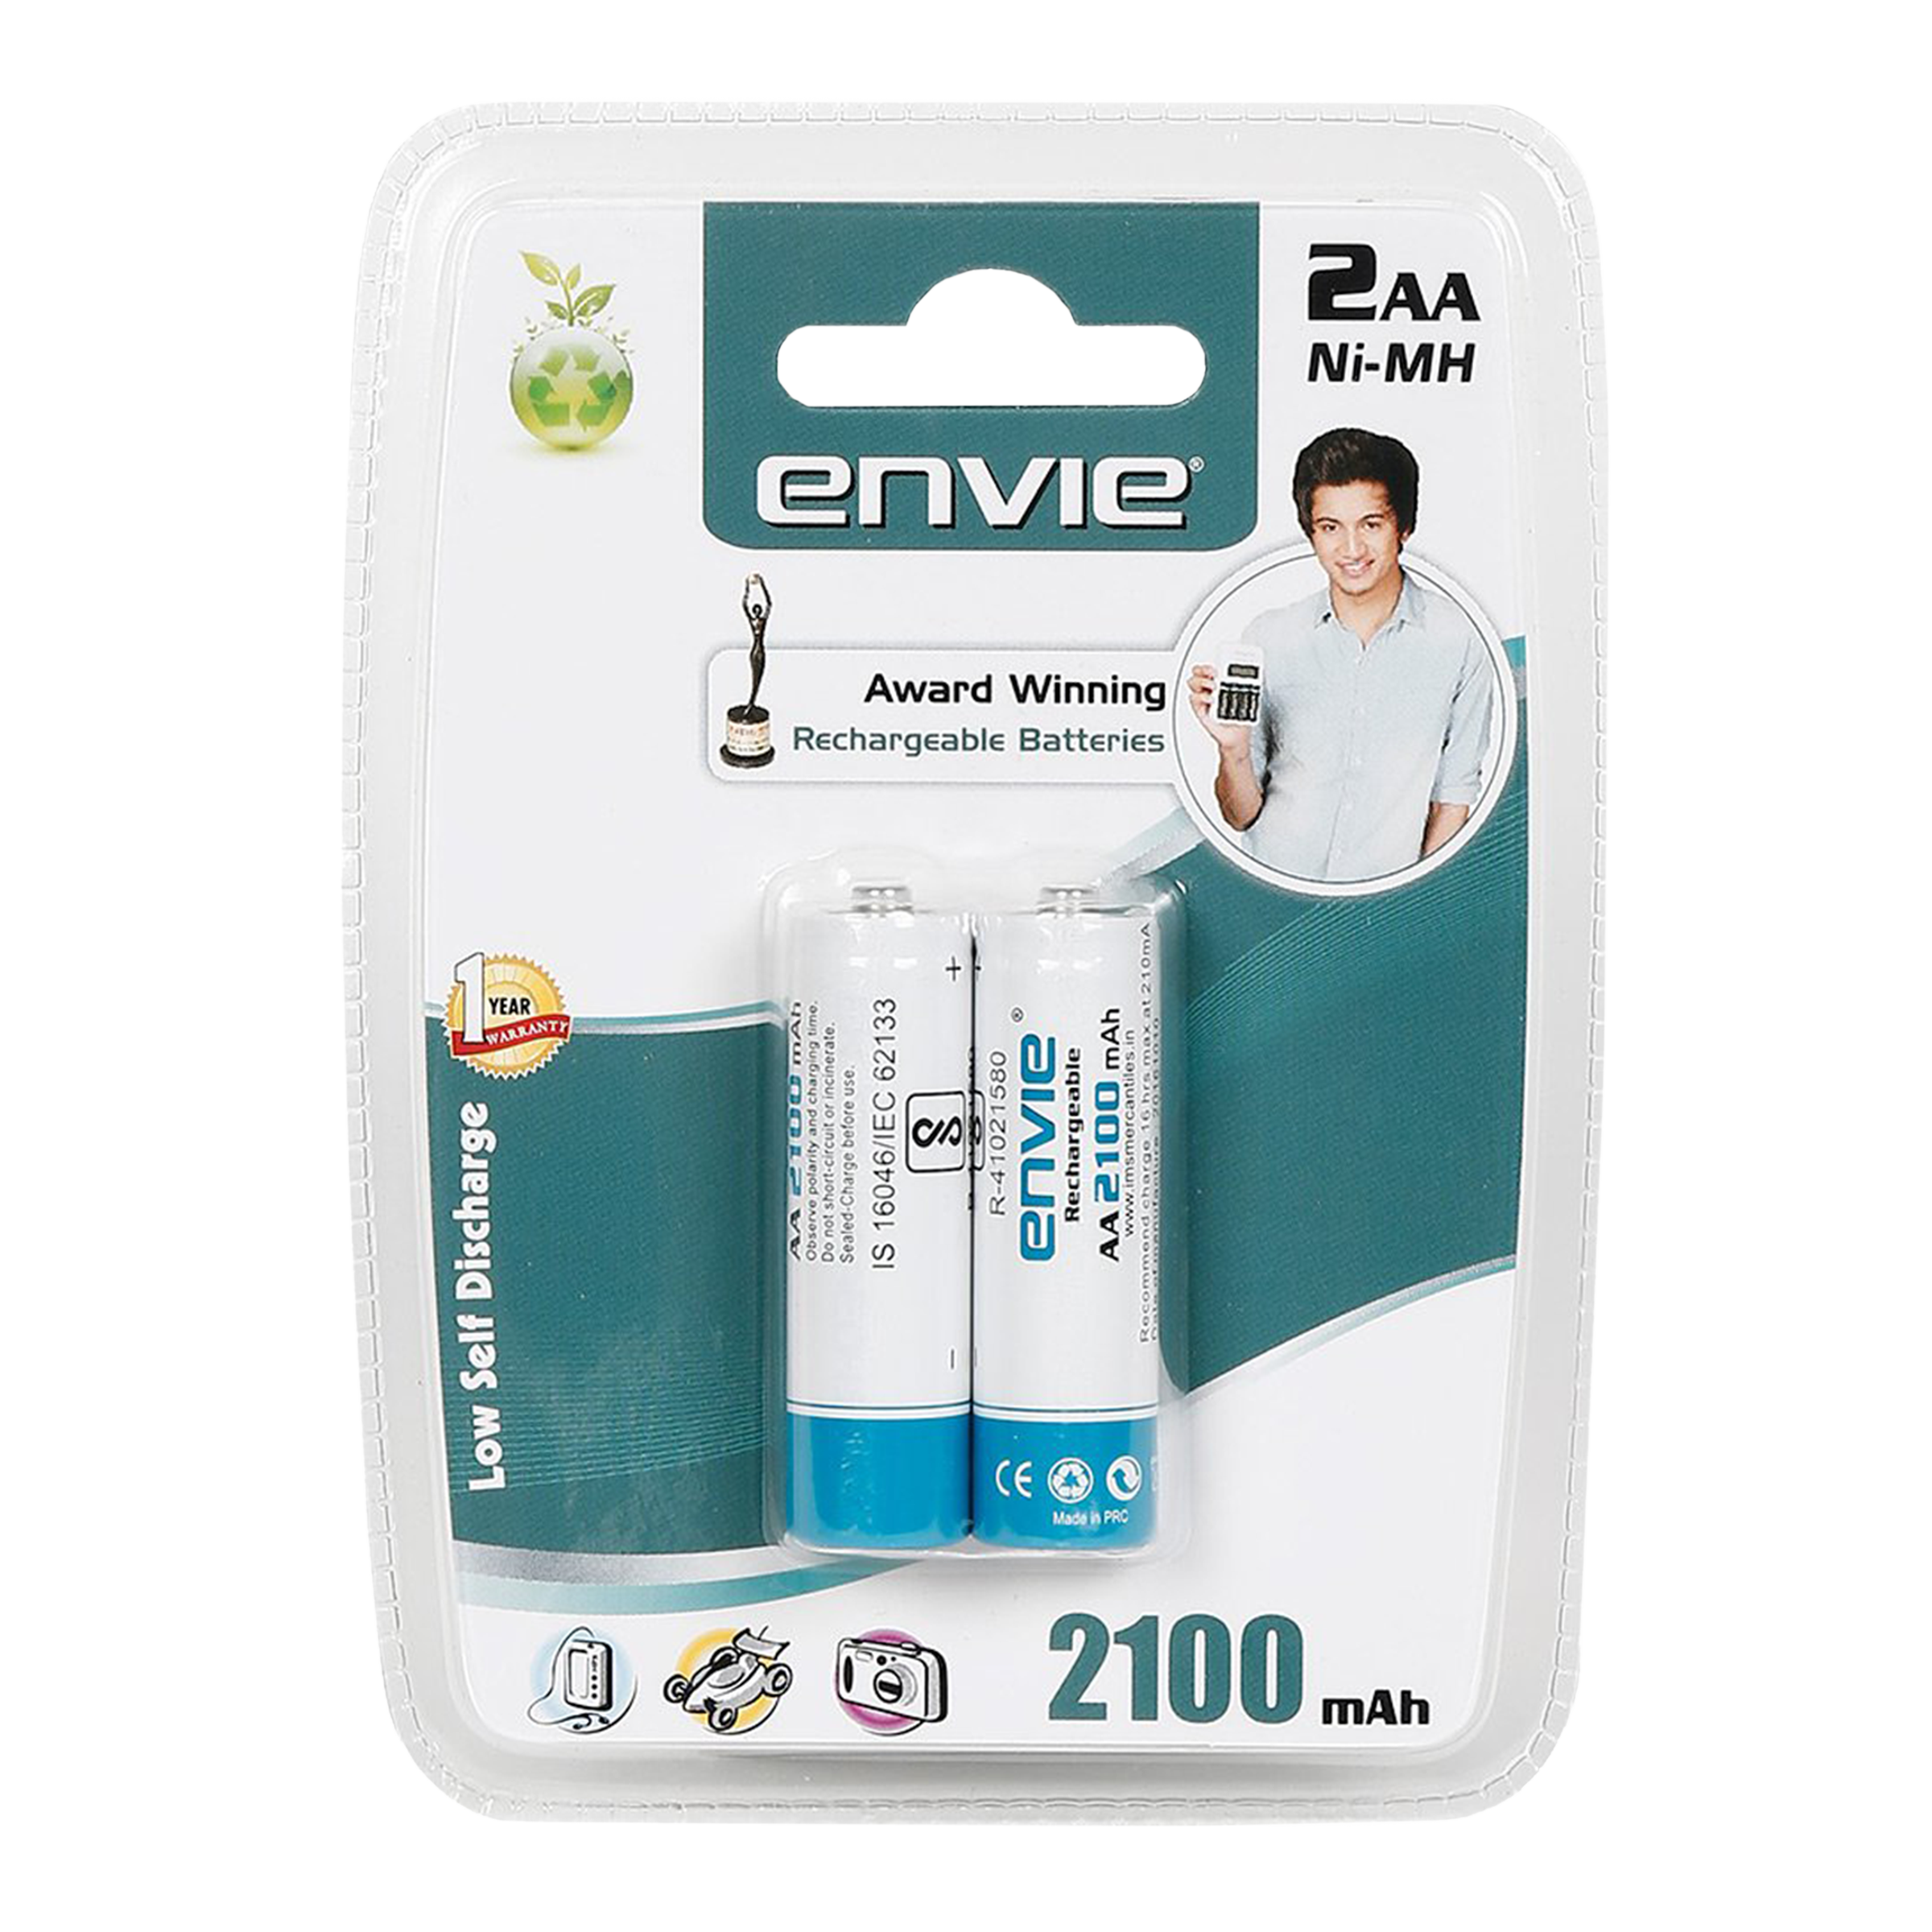 envie Infinite 2100 mAh Ni-MH AA Rechargeable Battery (Pack of 2)